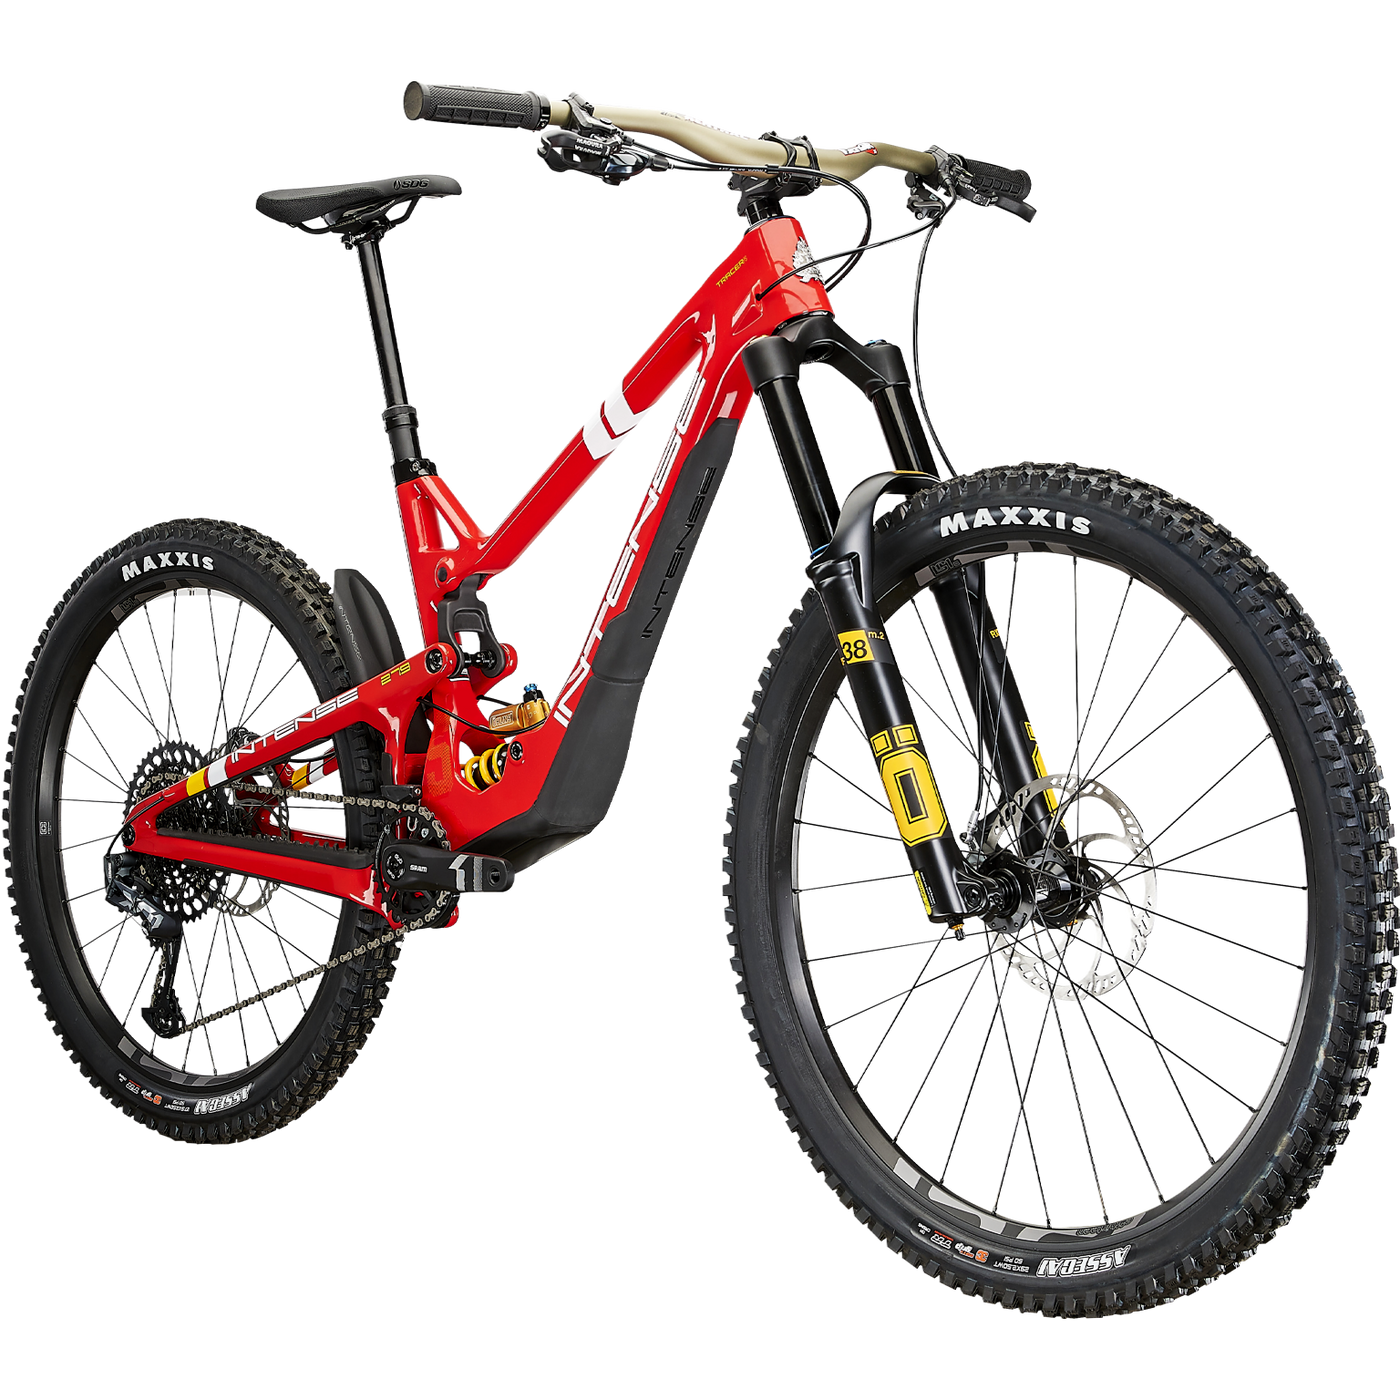 Shop online for the INTENSE Tracer S Carbon Enduro Mountain Bike for sale online or at authorized dealers